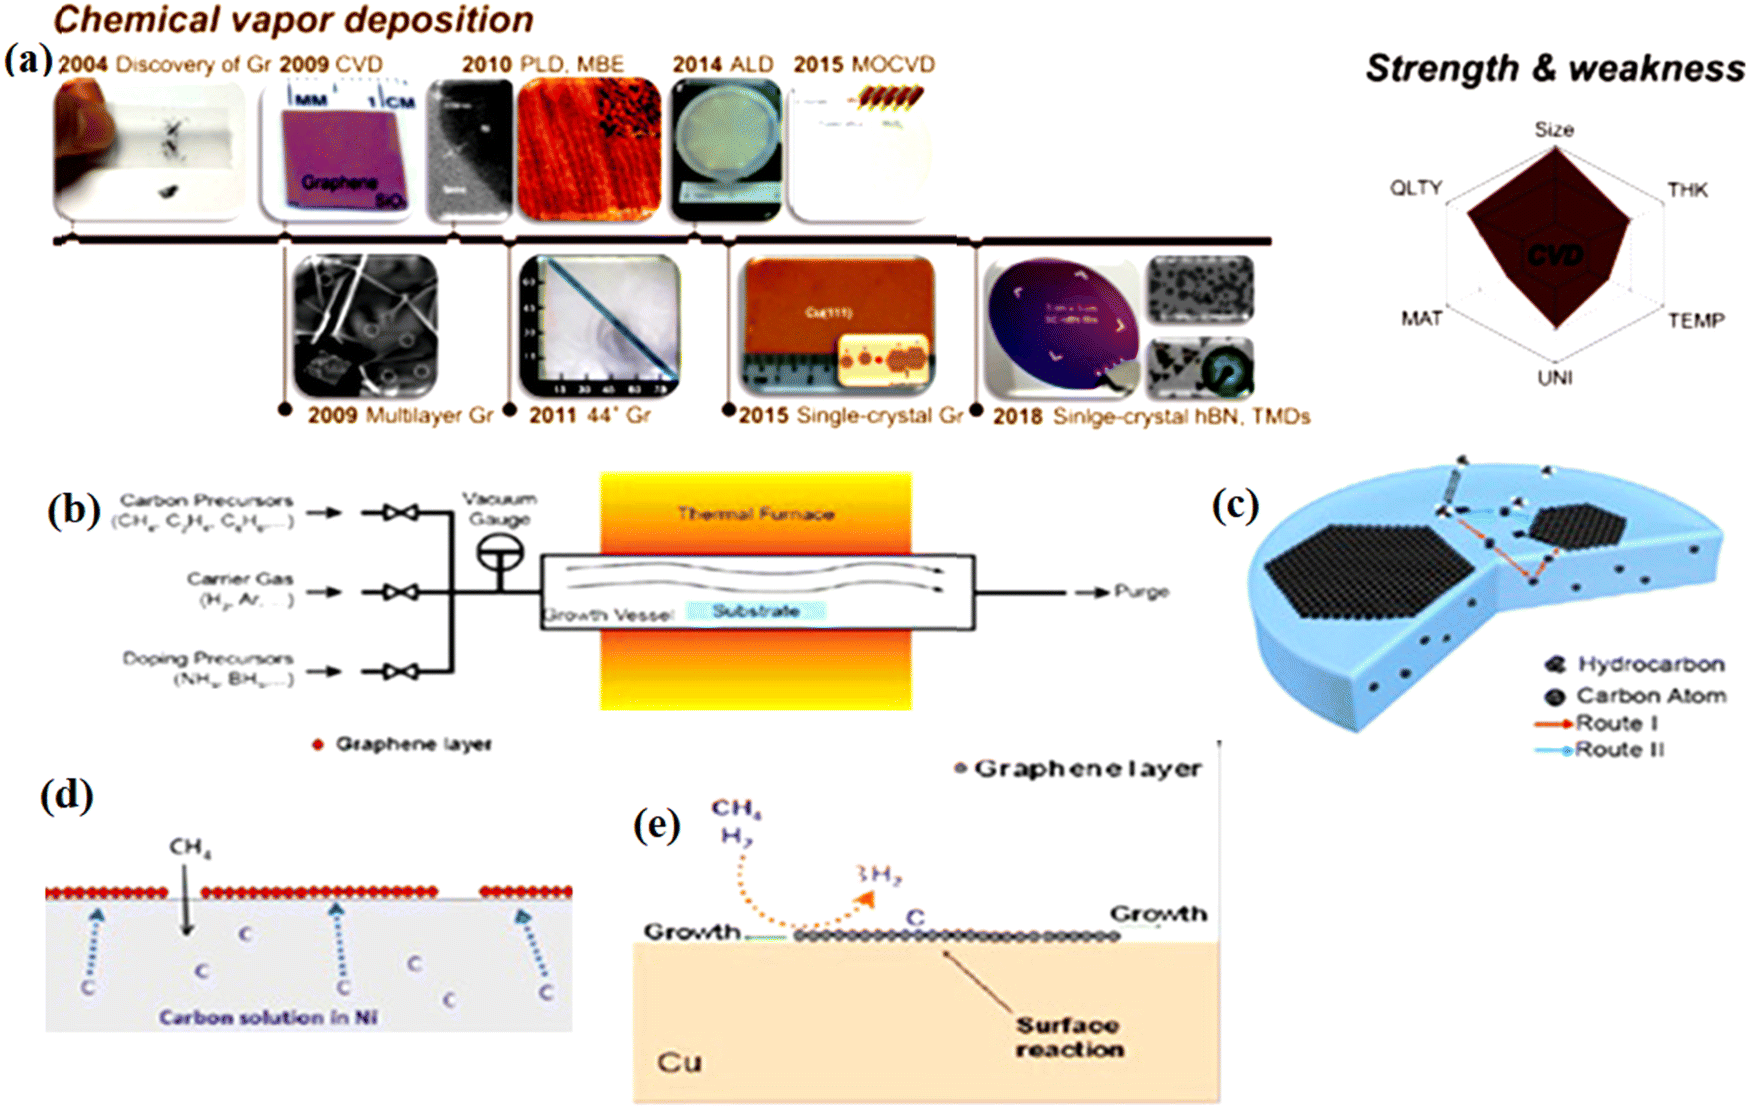 Recent major advances and challenges in the emerging graphene 